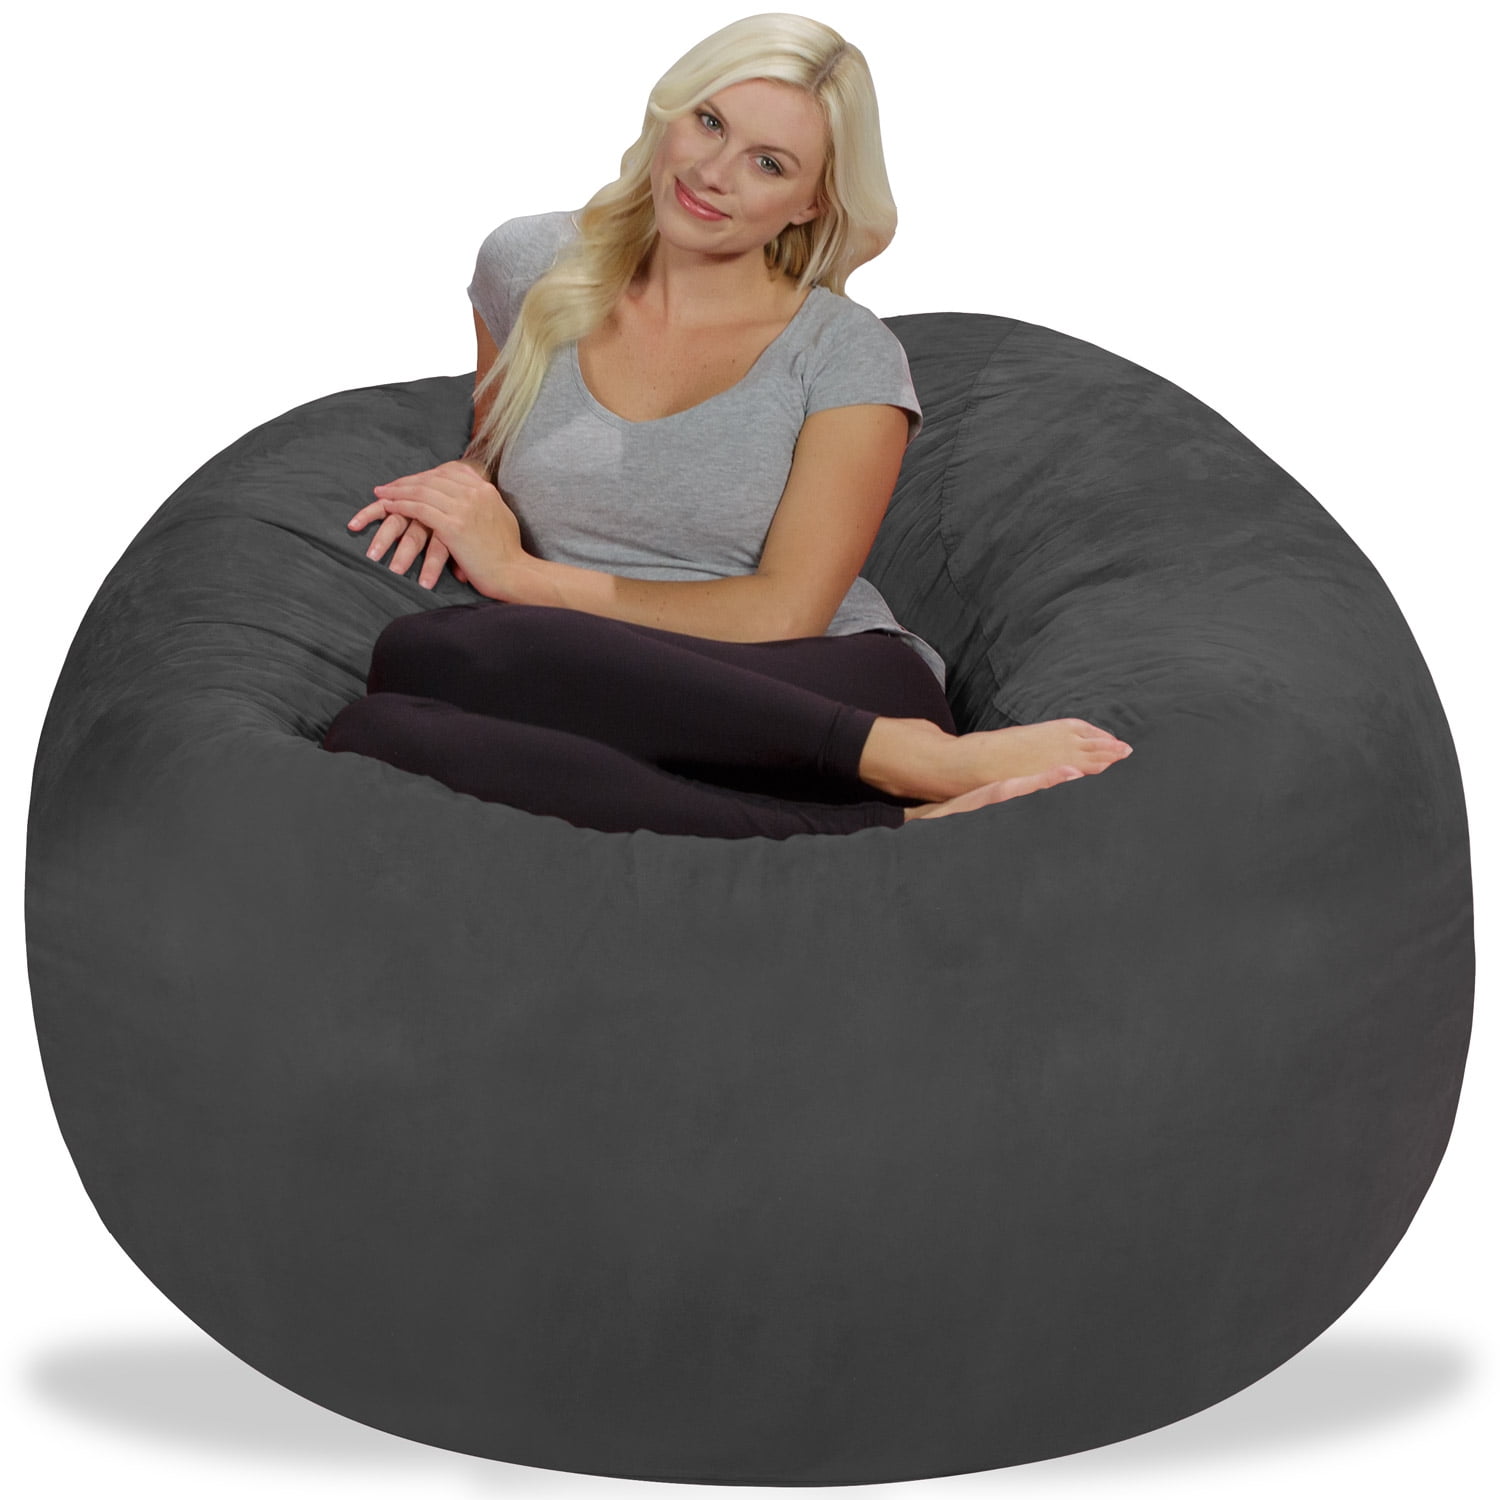 Chill Sack Bean Bag Chair, Memory Foam Lounger with Micorsuede